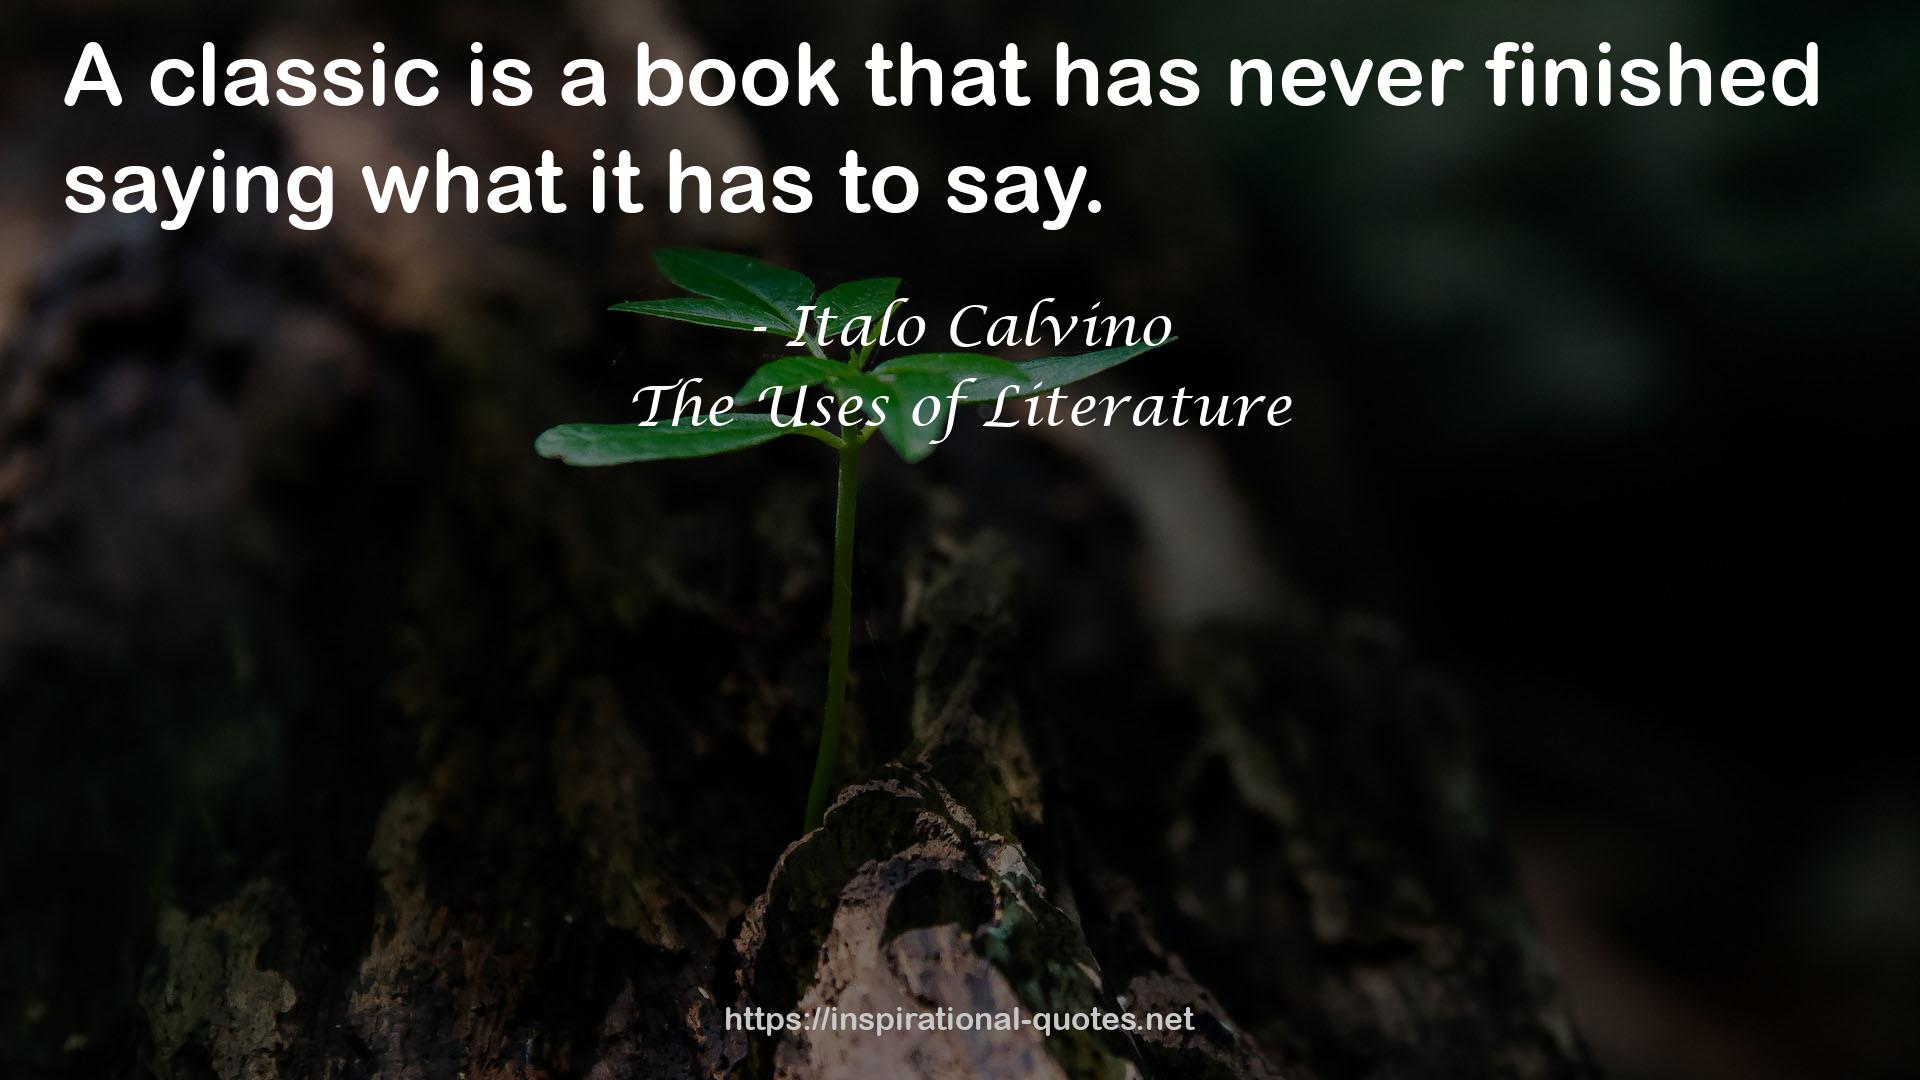 The Uses of Literature QUOTES